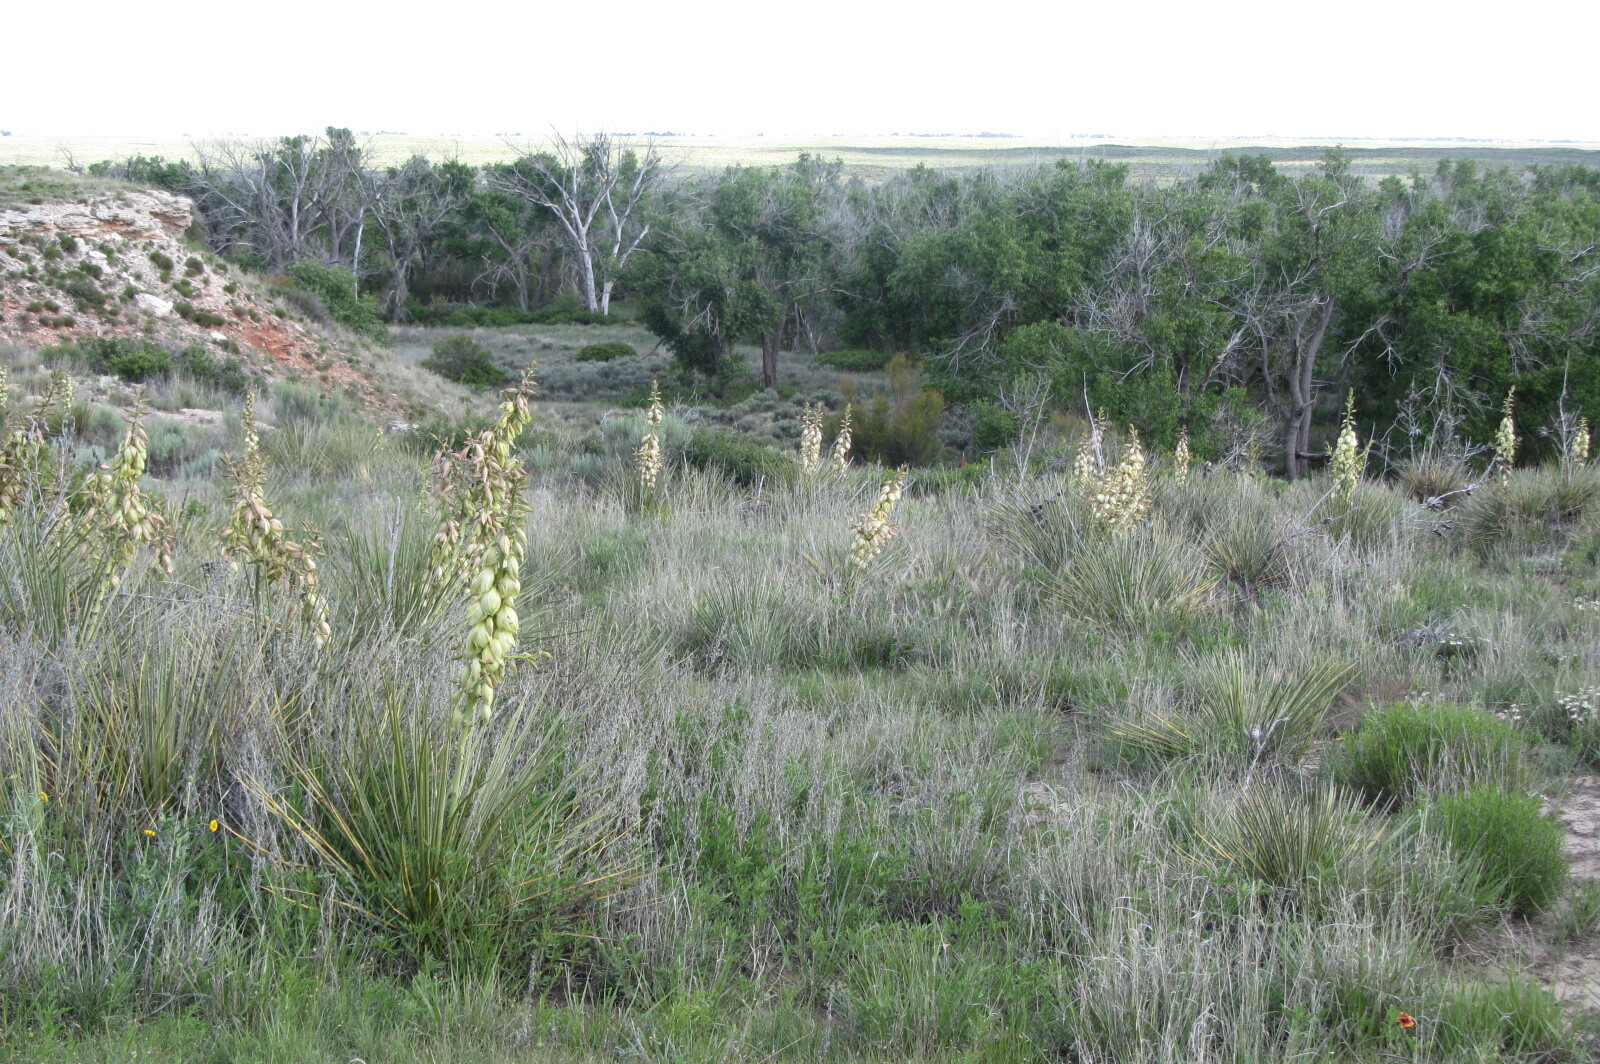 Cottonwoods and yucca plants at Middle Spring Site near Elkhart, KS